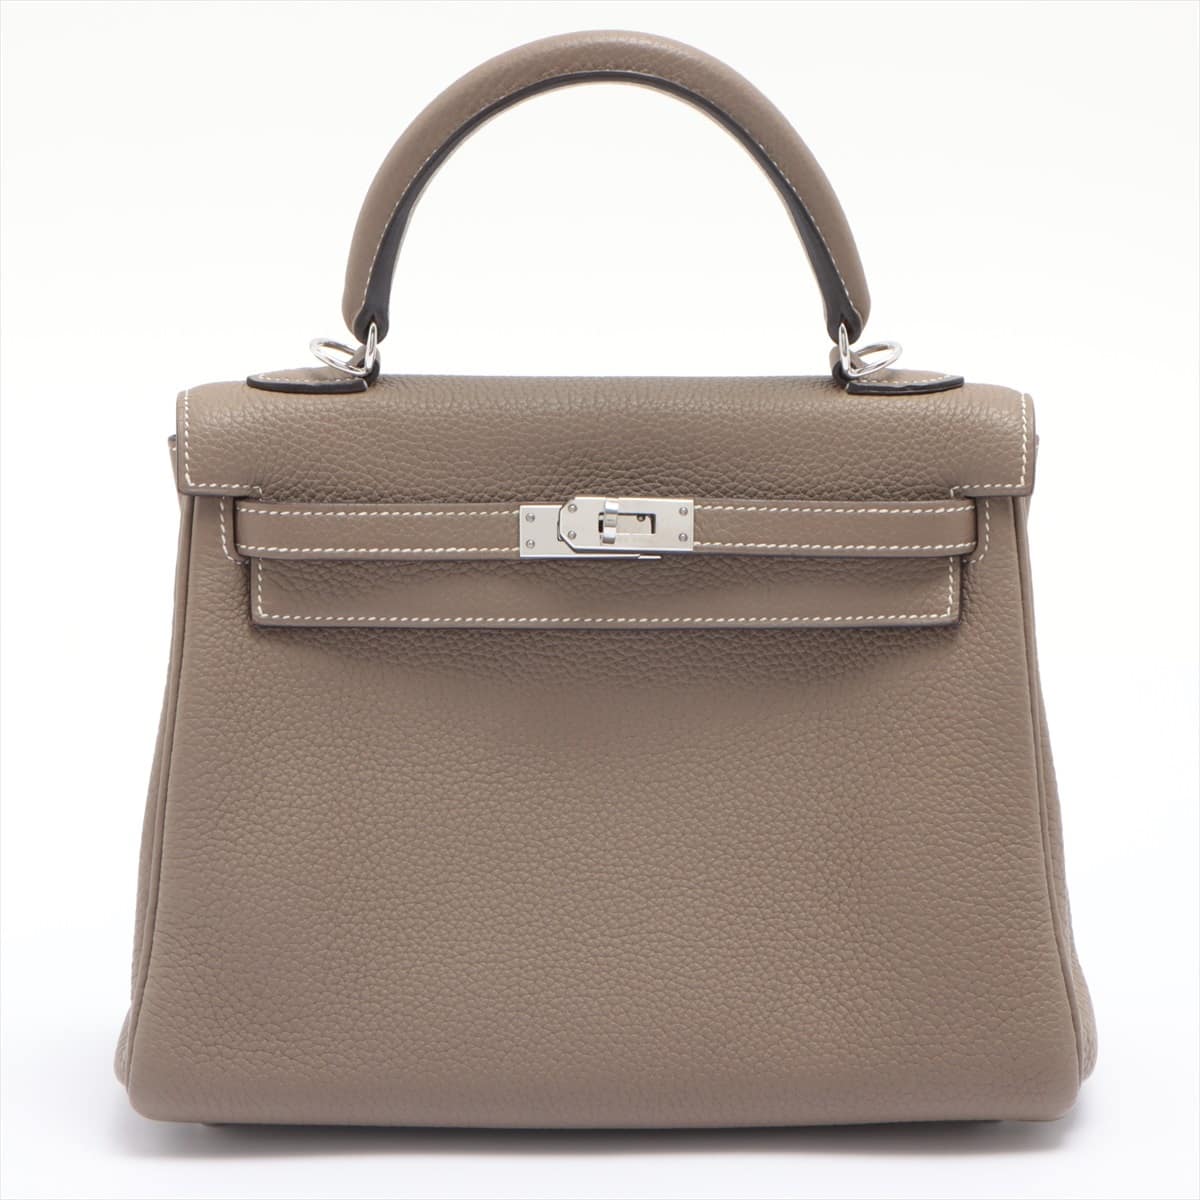 Hermès Kelly 25 Taurillon Clemence Etoupe Silver Metal fittings The engraving is not clear